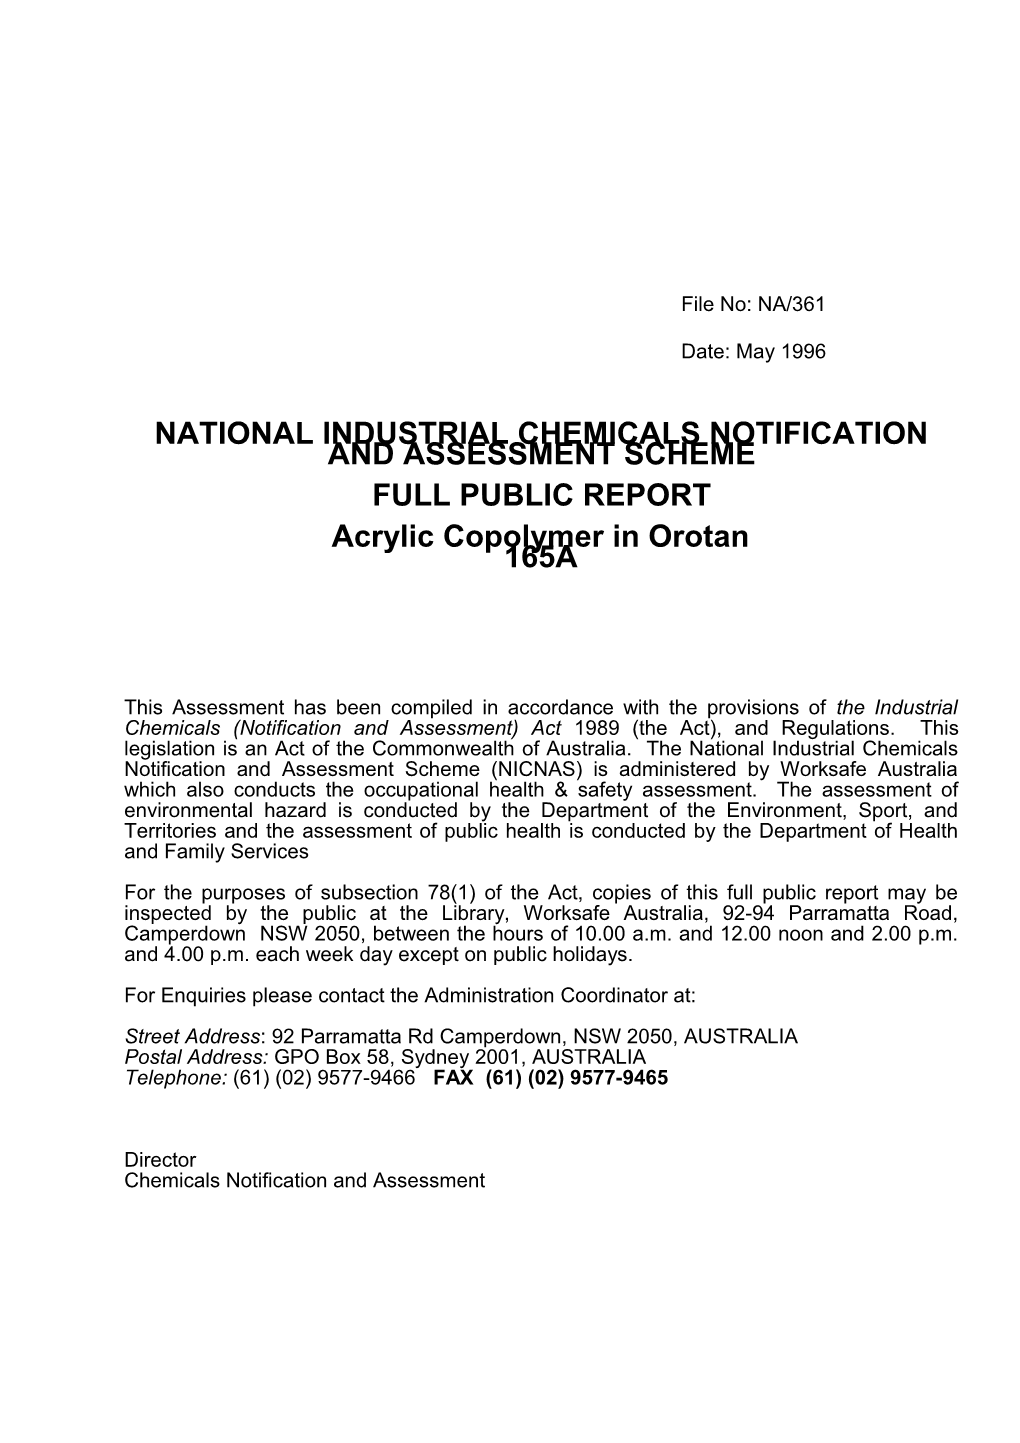 National Industrial Chemicals Notification s4